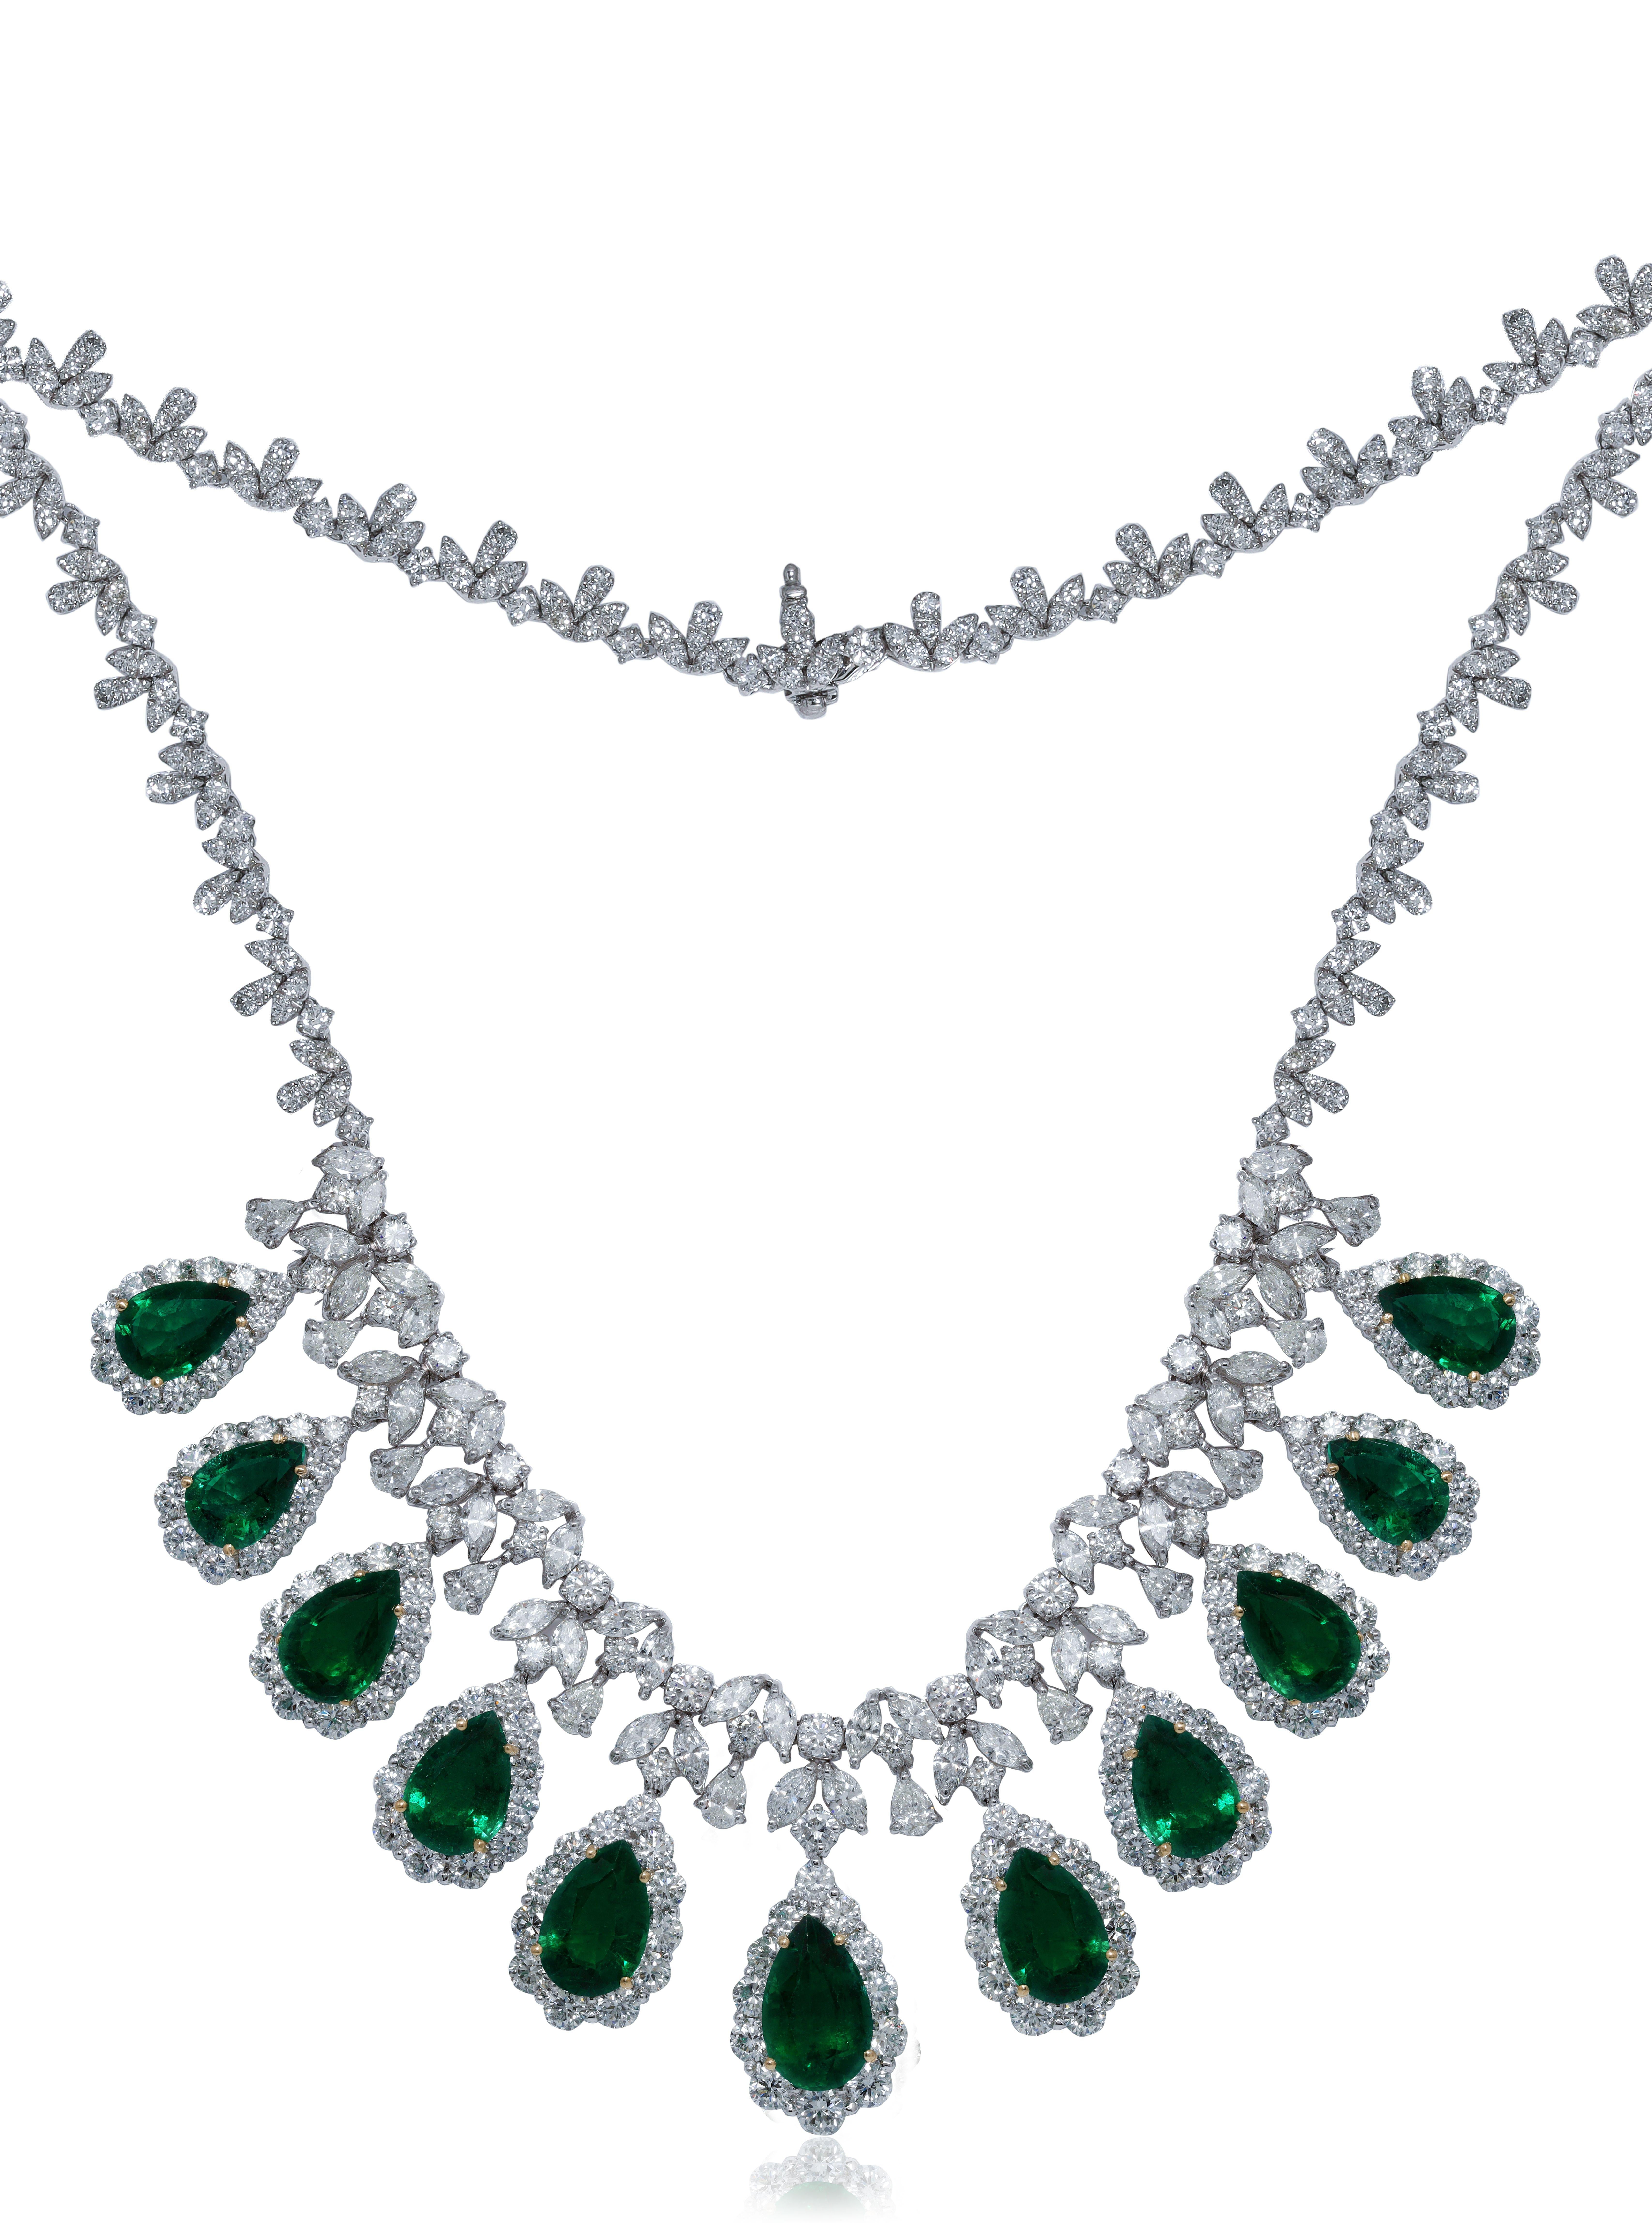 Pear Cut Diana M. Certified 34.51 Carat Zambian Emerald and Diamond Necklace For Sale